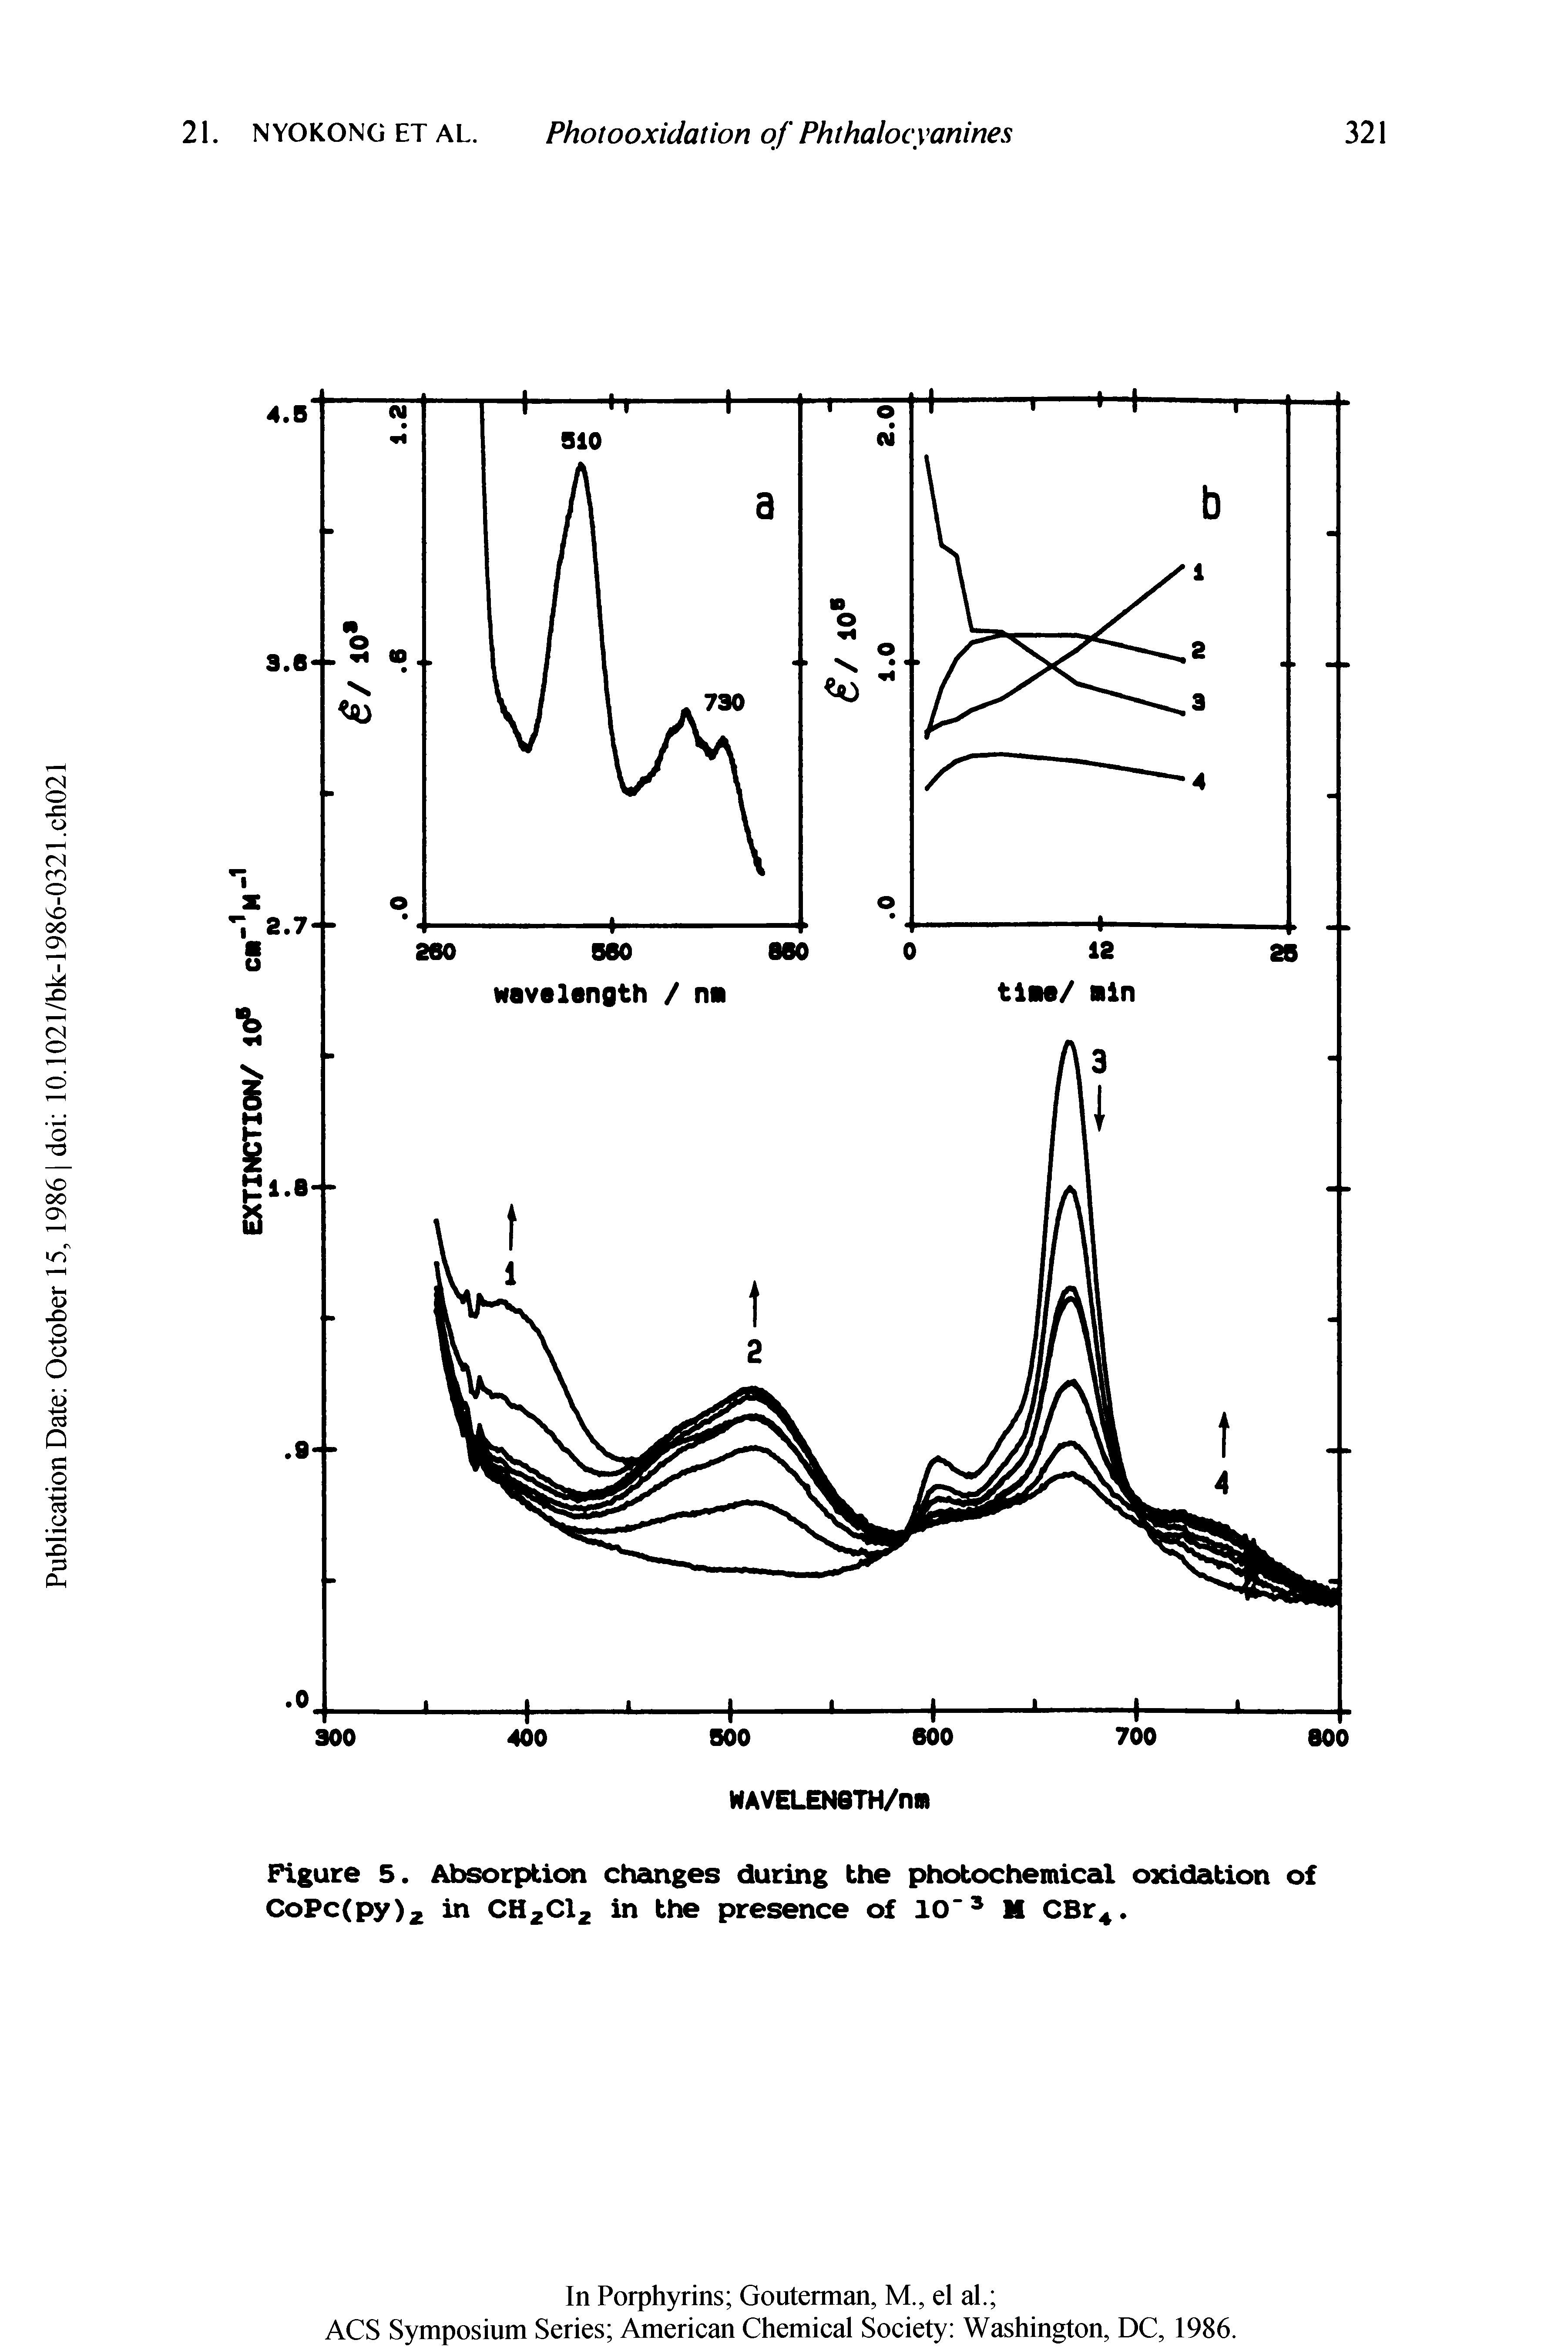 Figure 5. Absorption changes during the photochemical oxidation of CoPc(py>2 in CH2CI2 in the presence of 10 M CBr4.